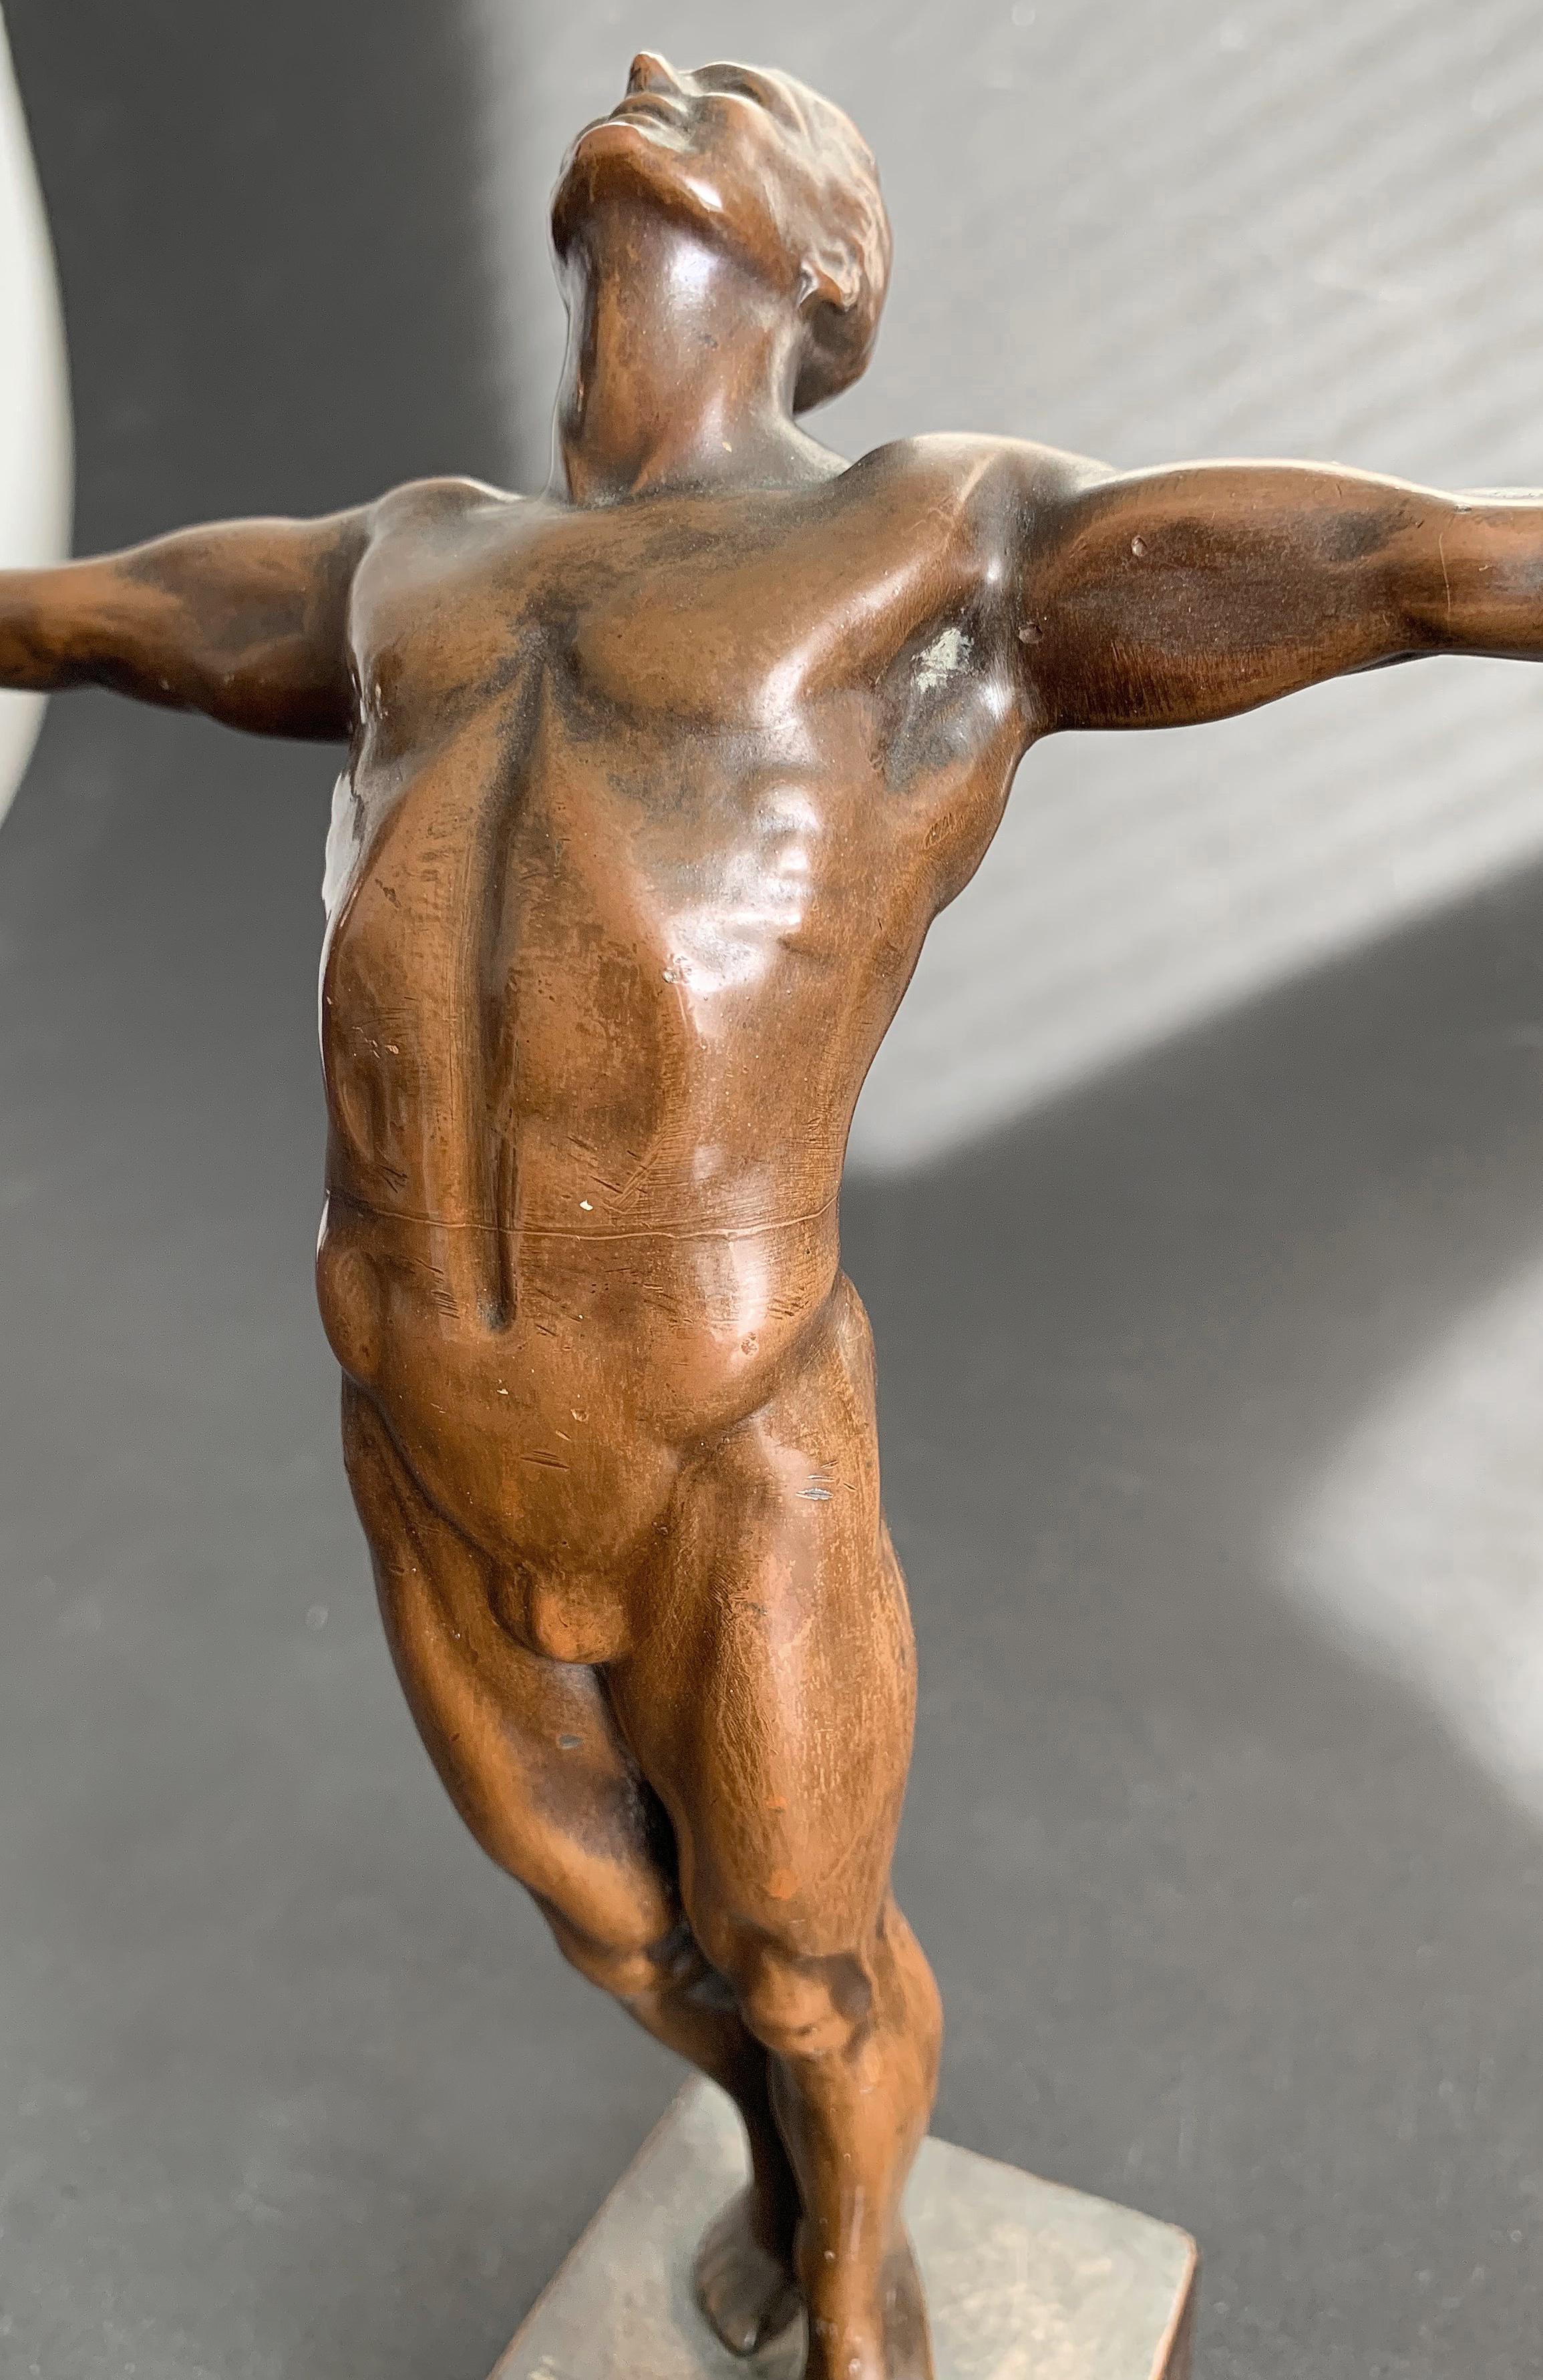 ‘Dedication to Service, ’ Rare Art Deco Sculpture with Male Nude by Burnham 2